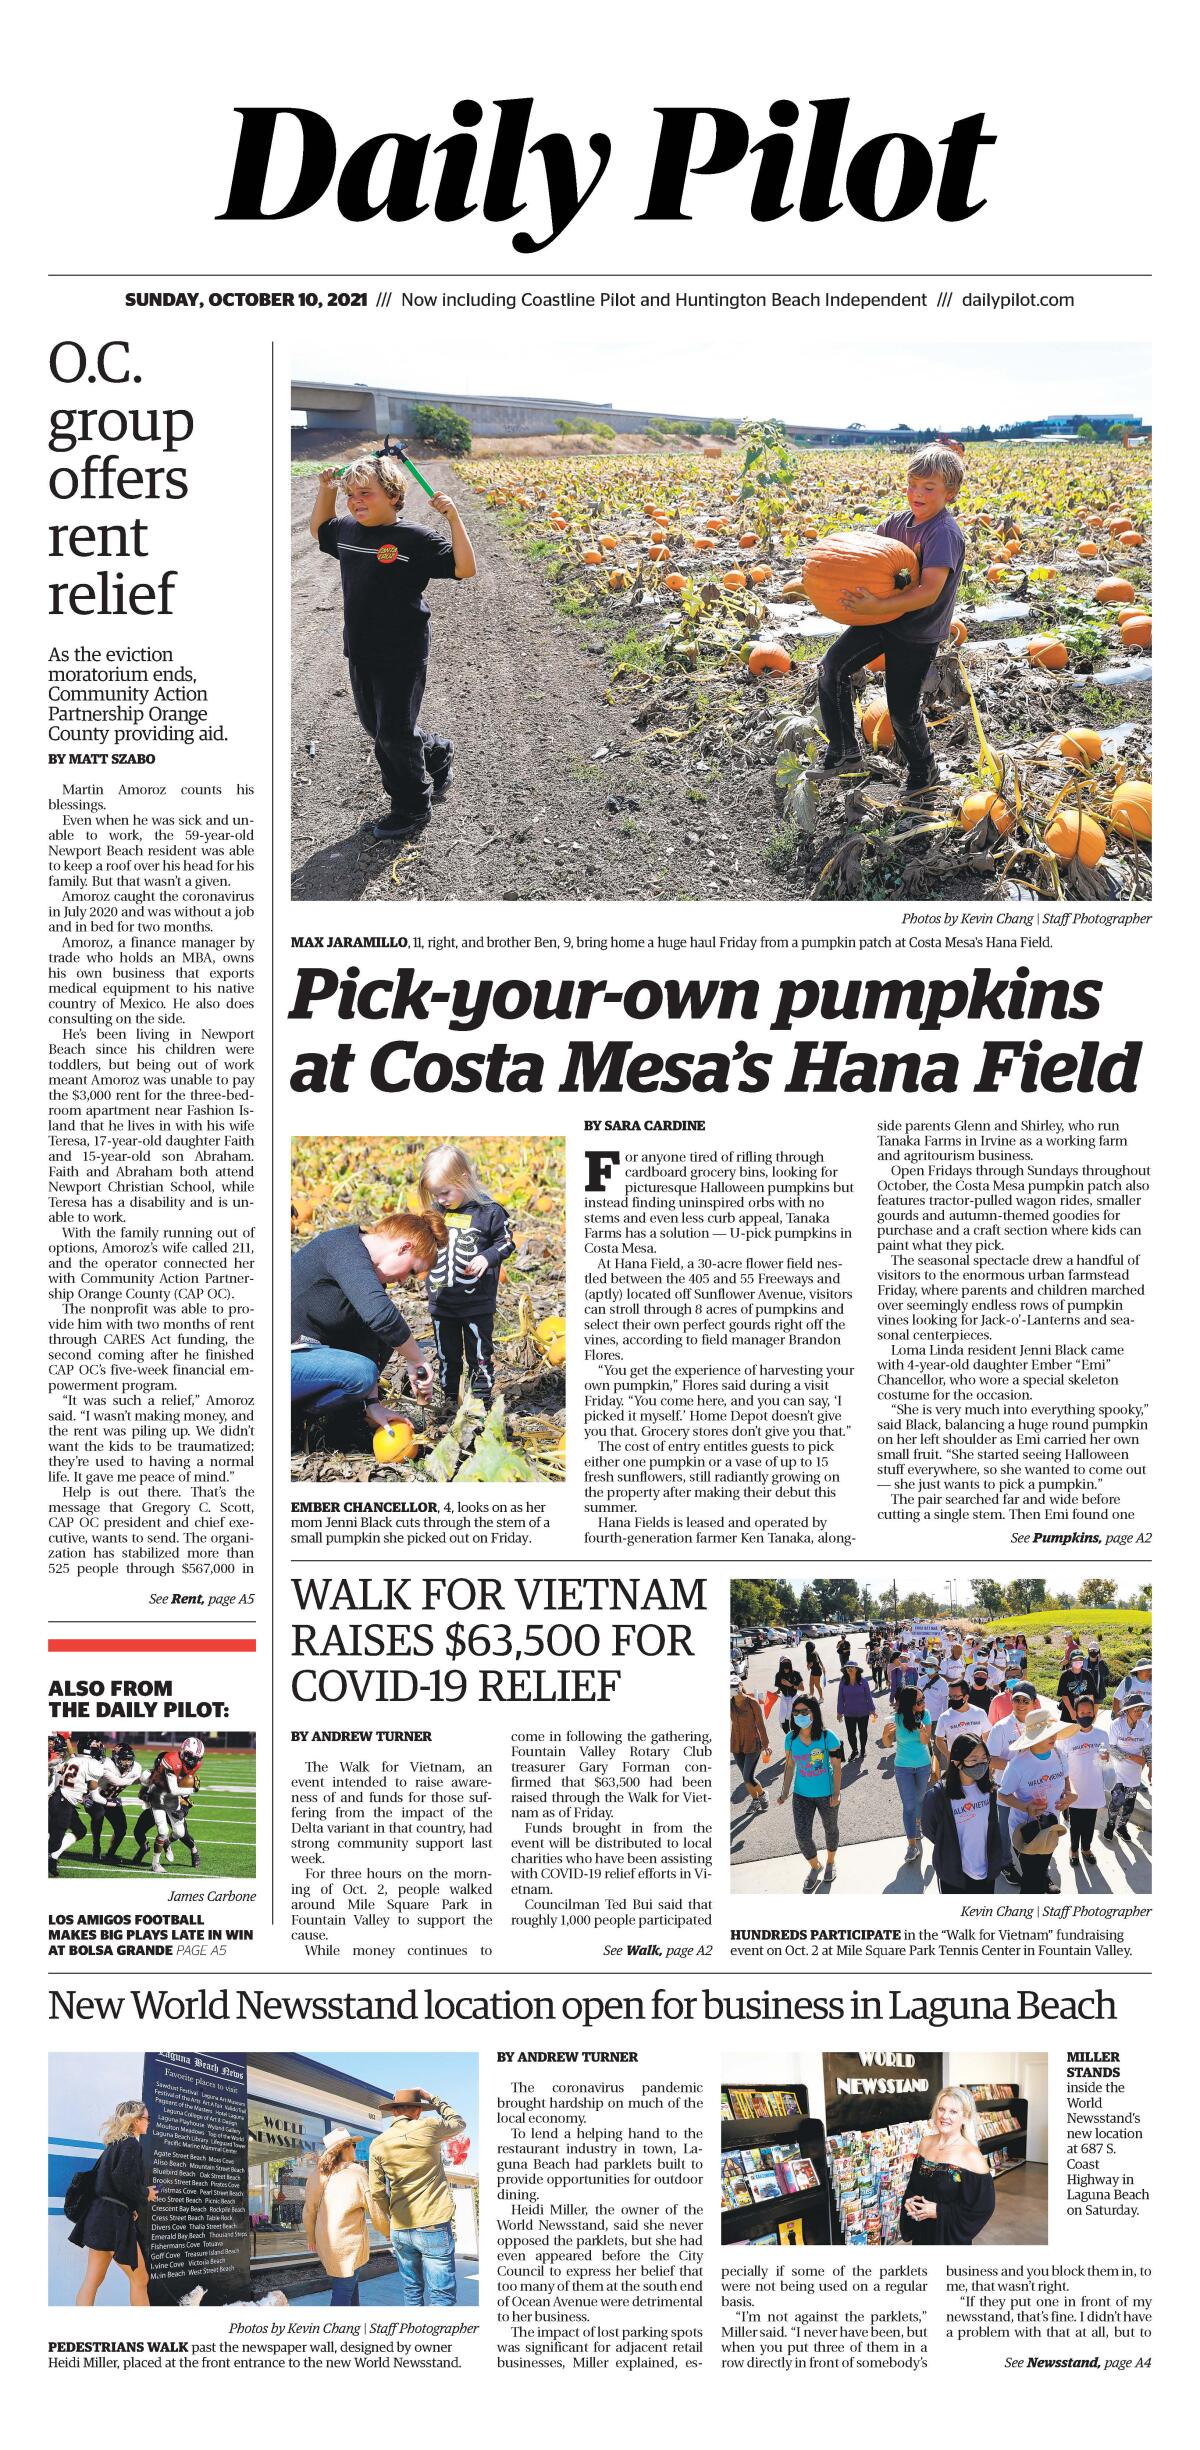 Front page of Daily Pilot e-newspaper for Sunday, Oct. 10, 2021.